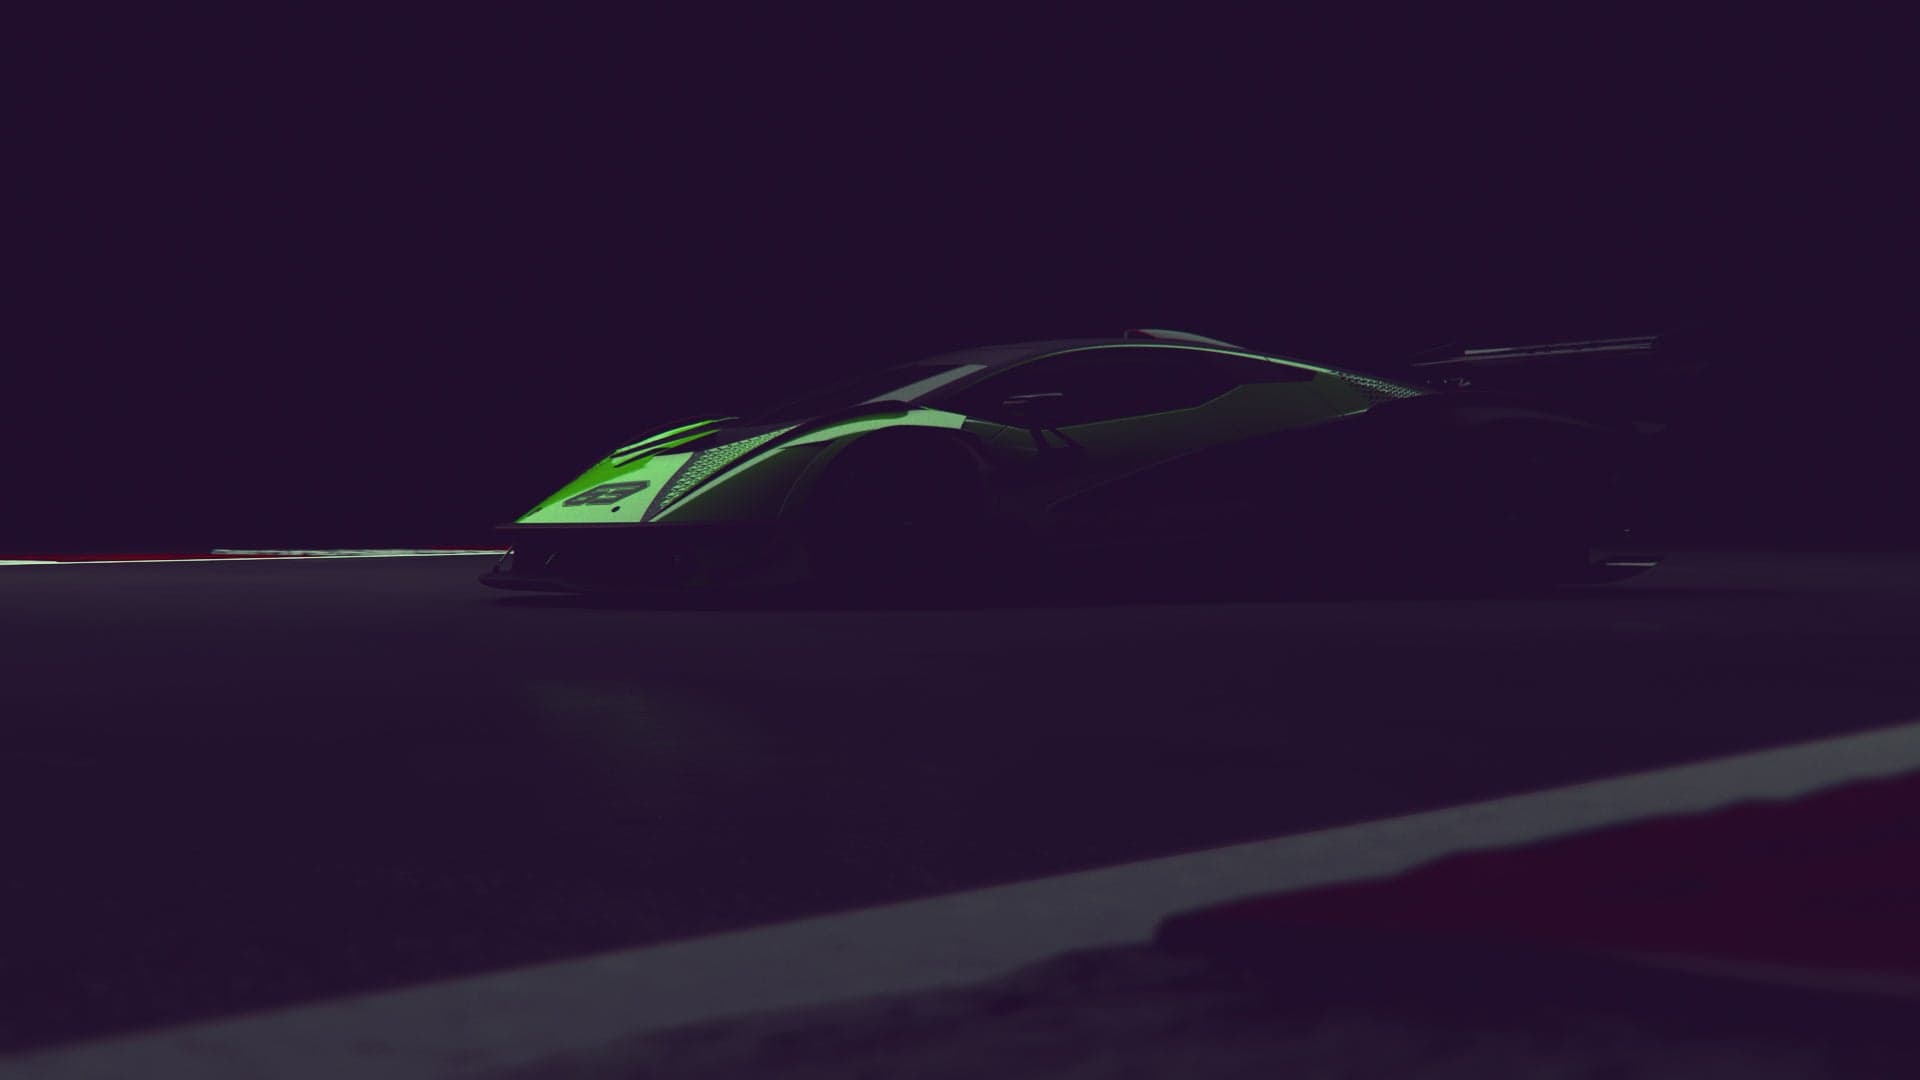 Lamborghini Teases 830-HP, Track-Only Hypercar Built by Squadra Corse Racing Division